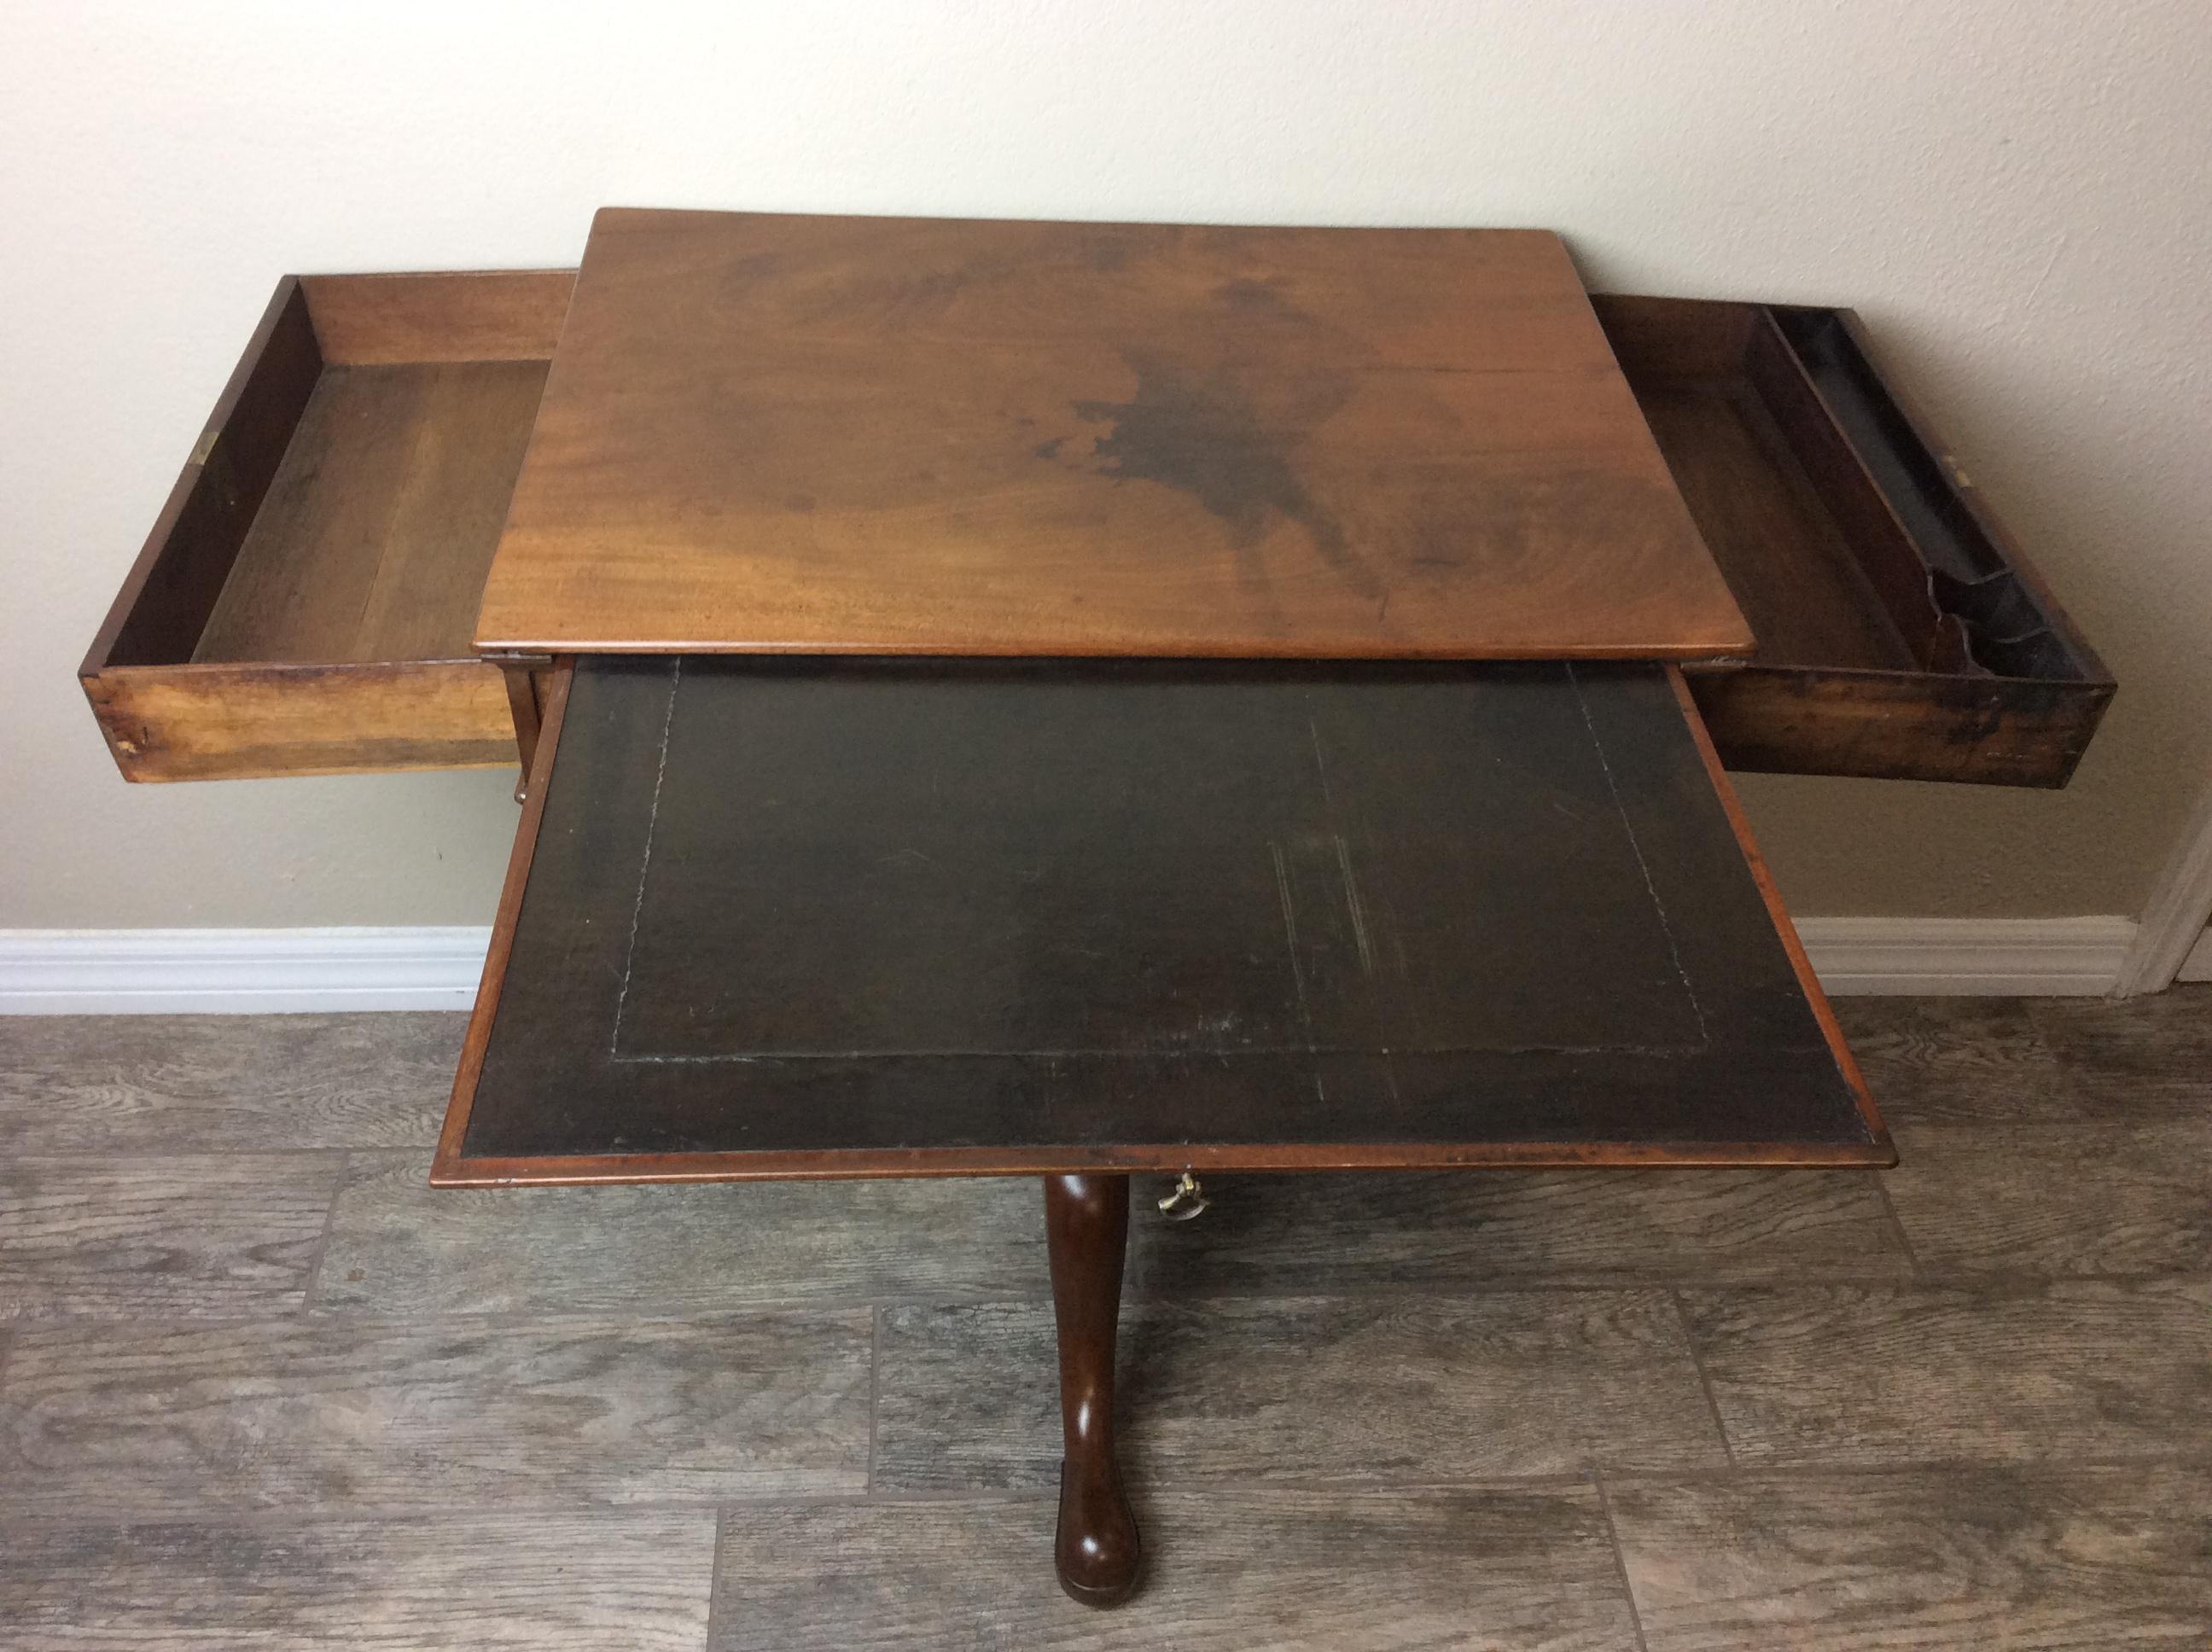 An excellent early Georgian Mahogany Writing / Work Table dating around 1780-1800. A fine example of a Writing Table of this period in very good condition. There is a drawer on either end, one encompassing an ink well and quill pen divided area.